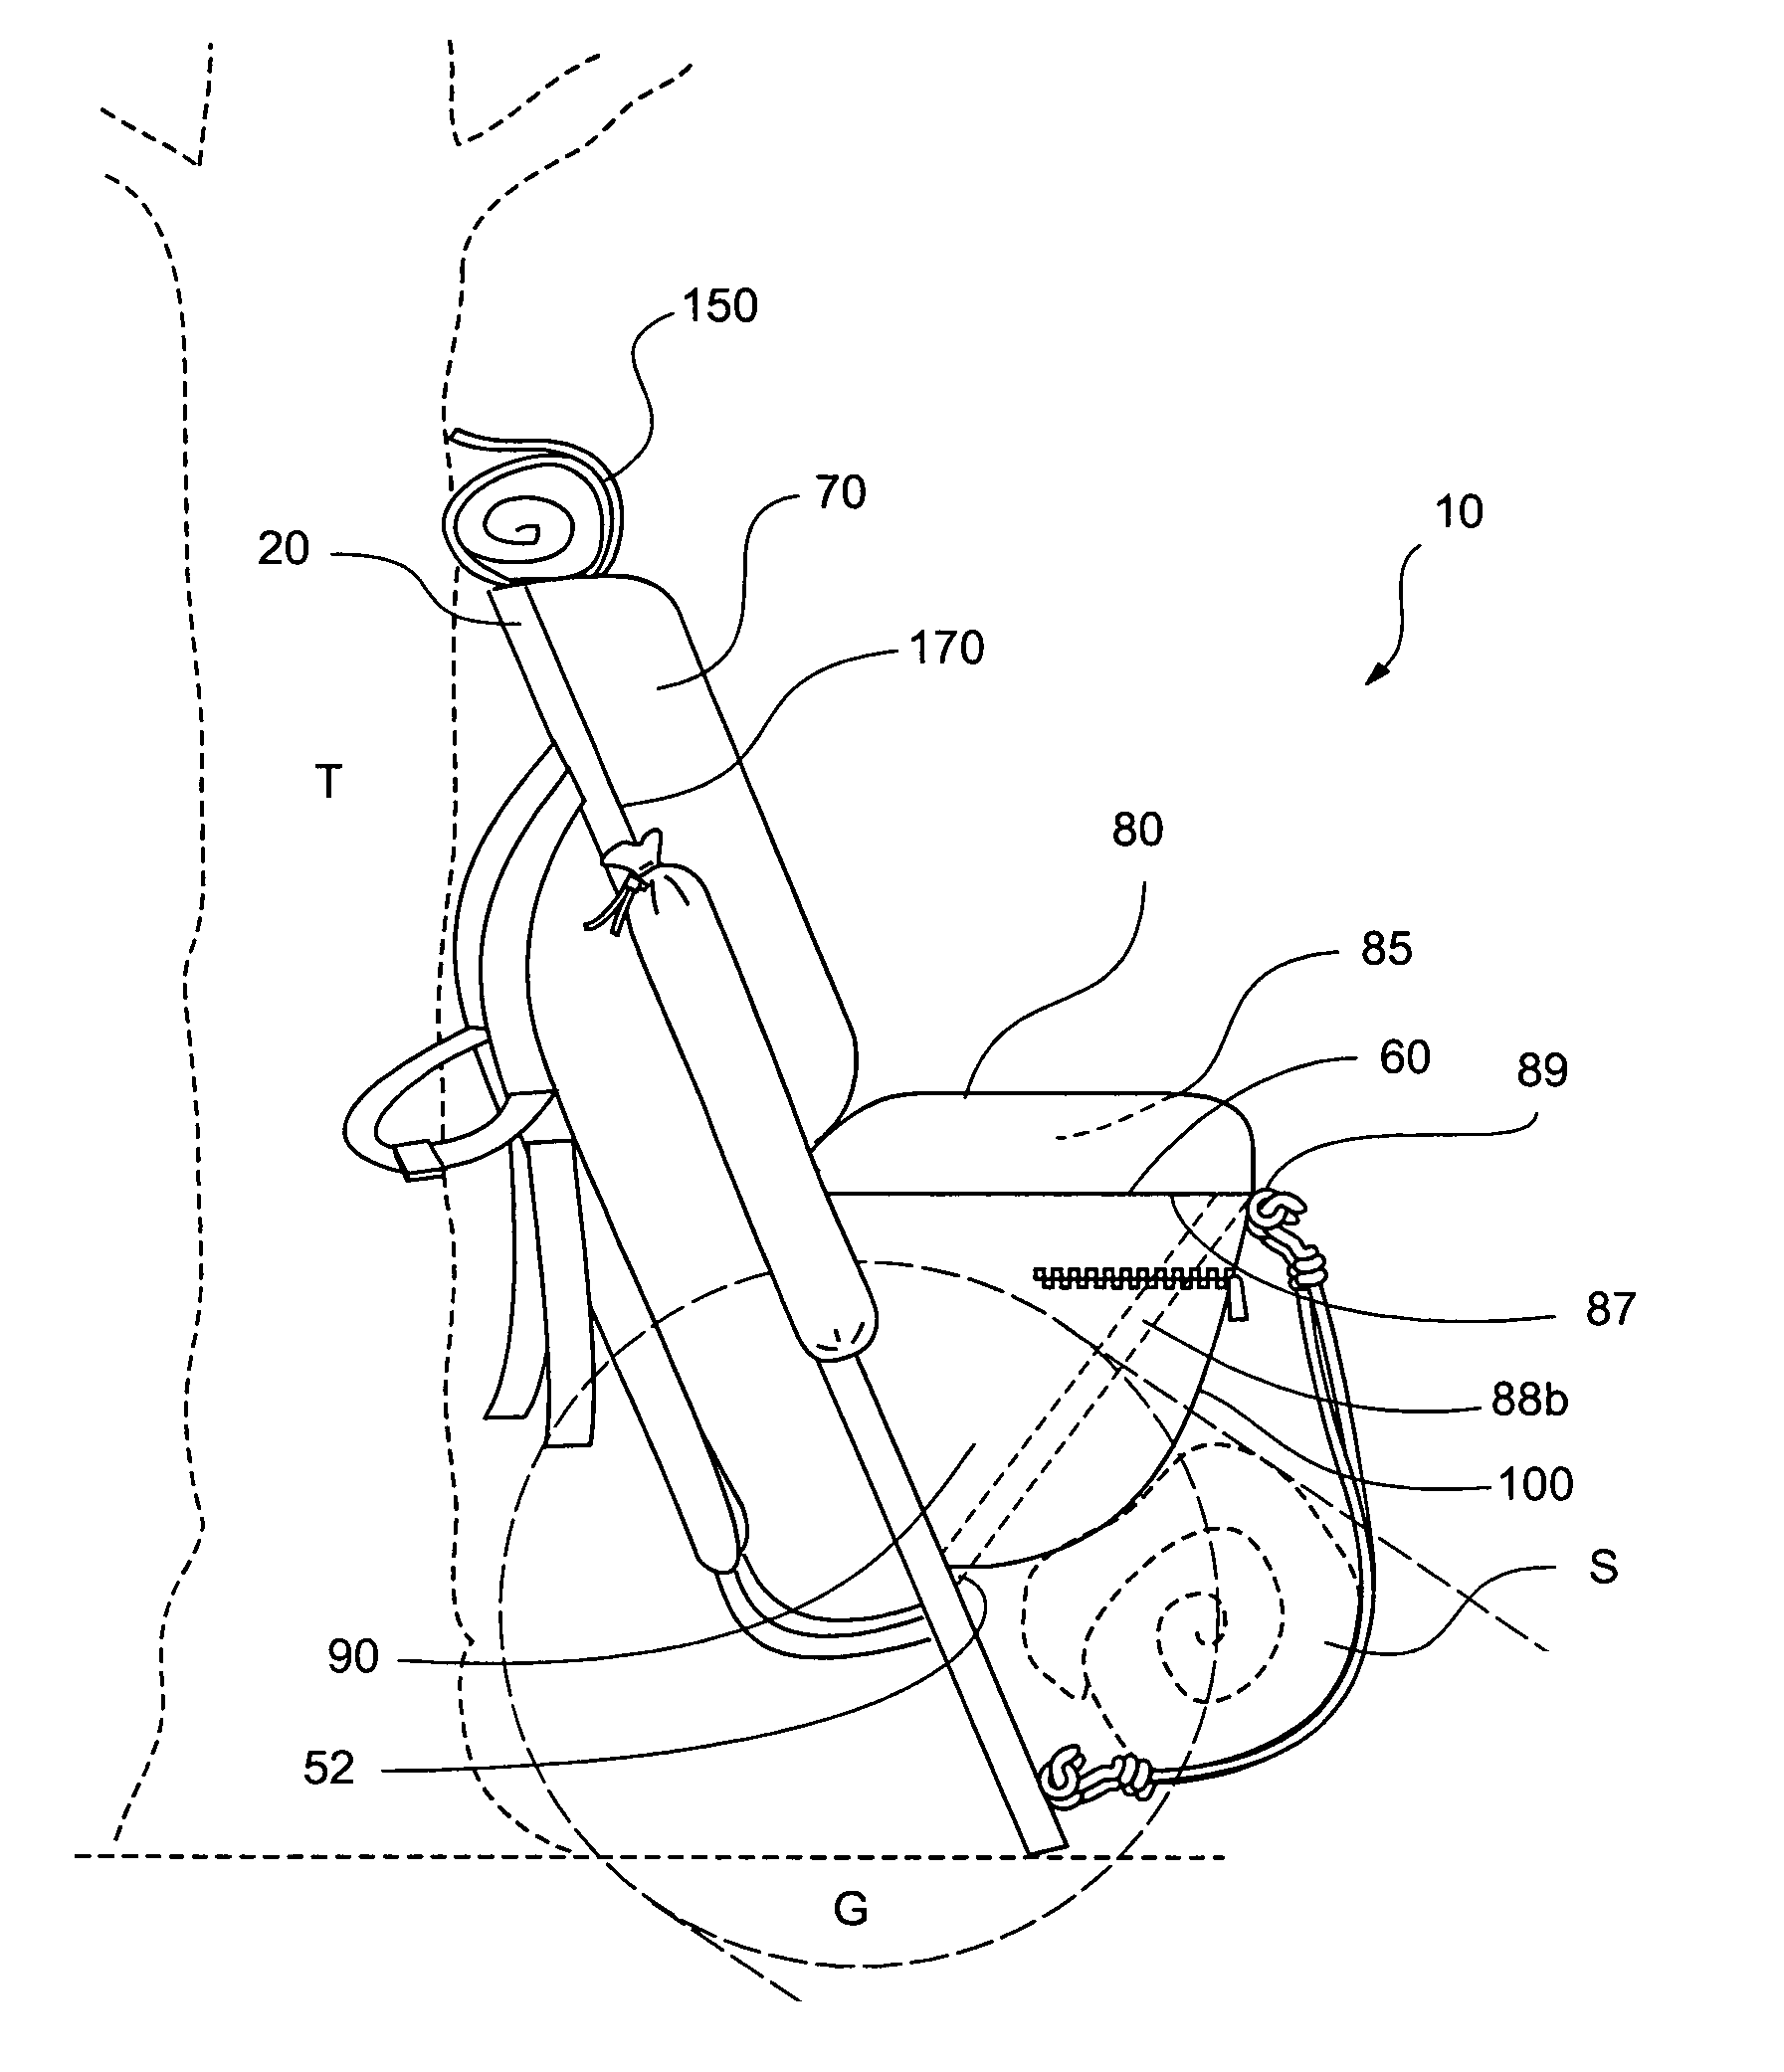 Hunting pack stool and method of use thereof